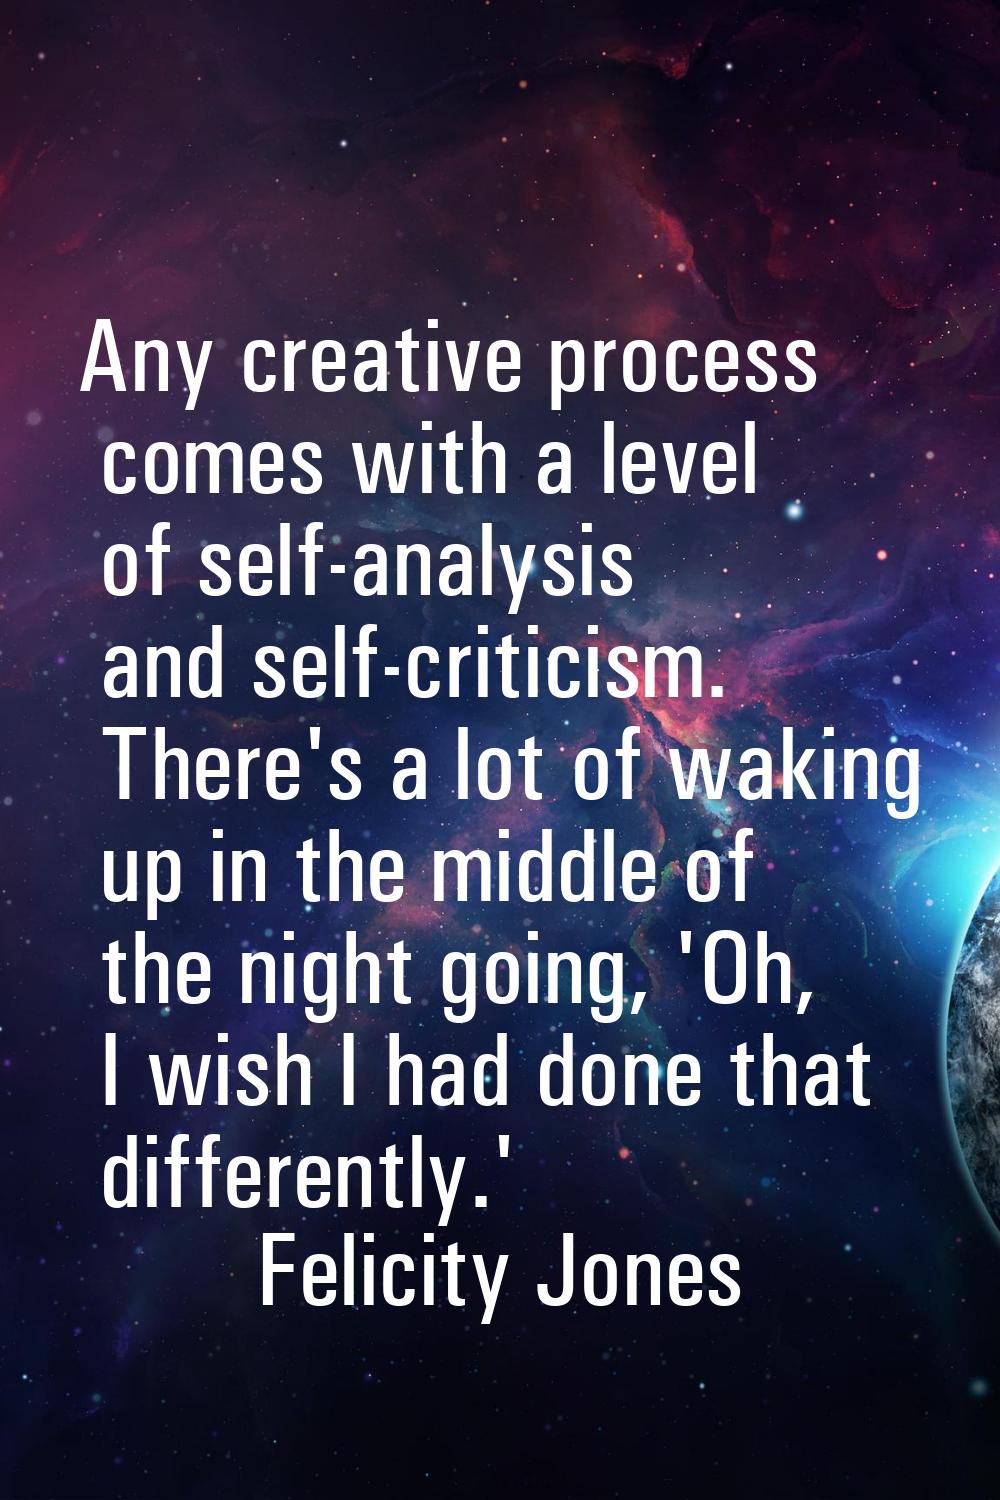 Any creative process comes with a level of self-analysis and self-criticism. There's a lot of wakin